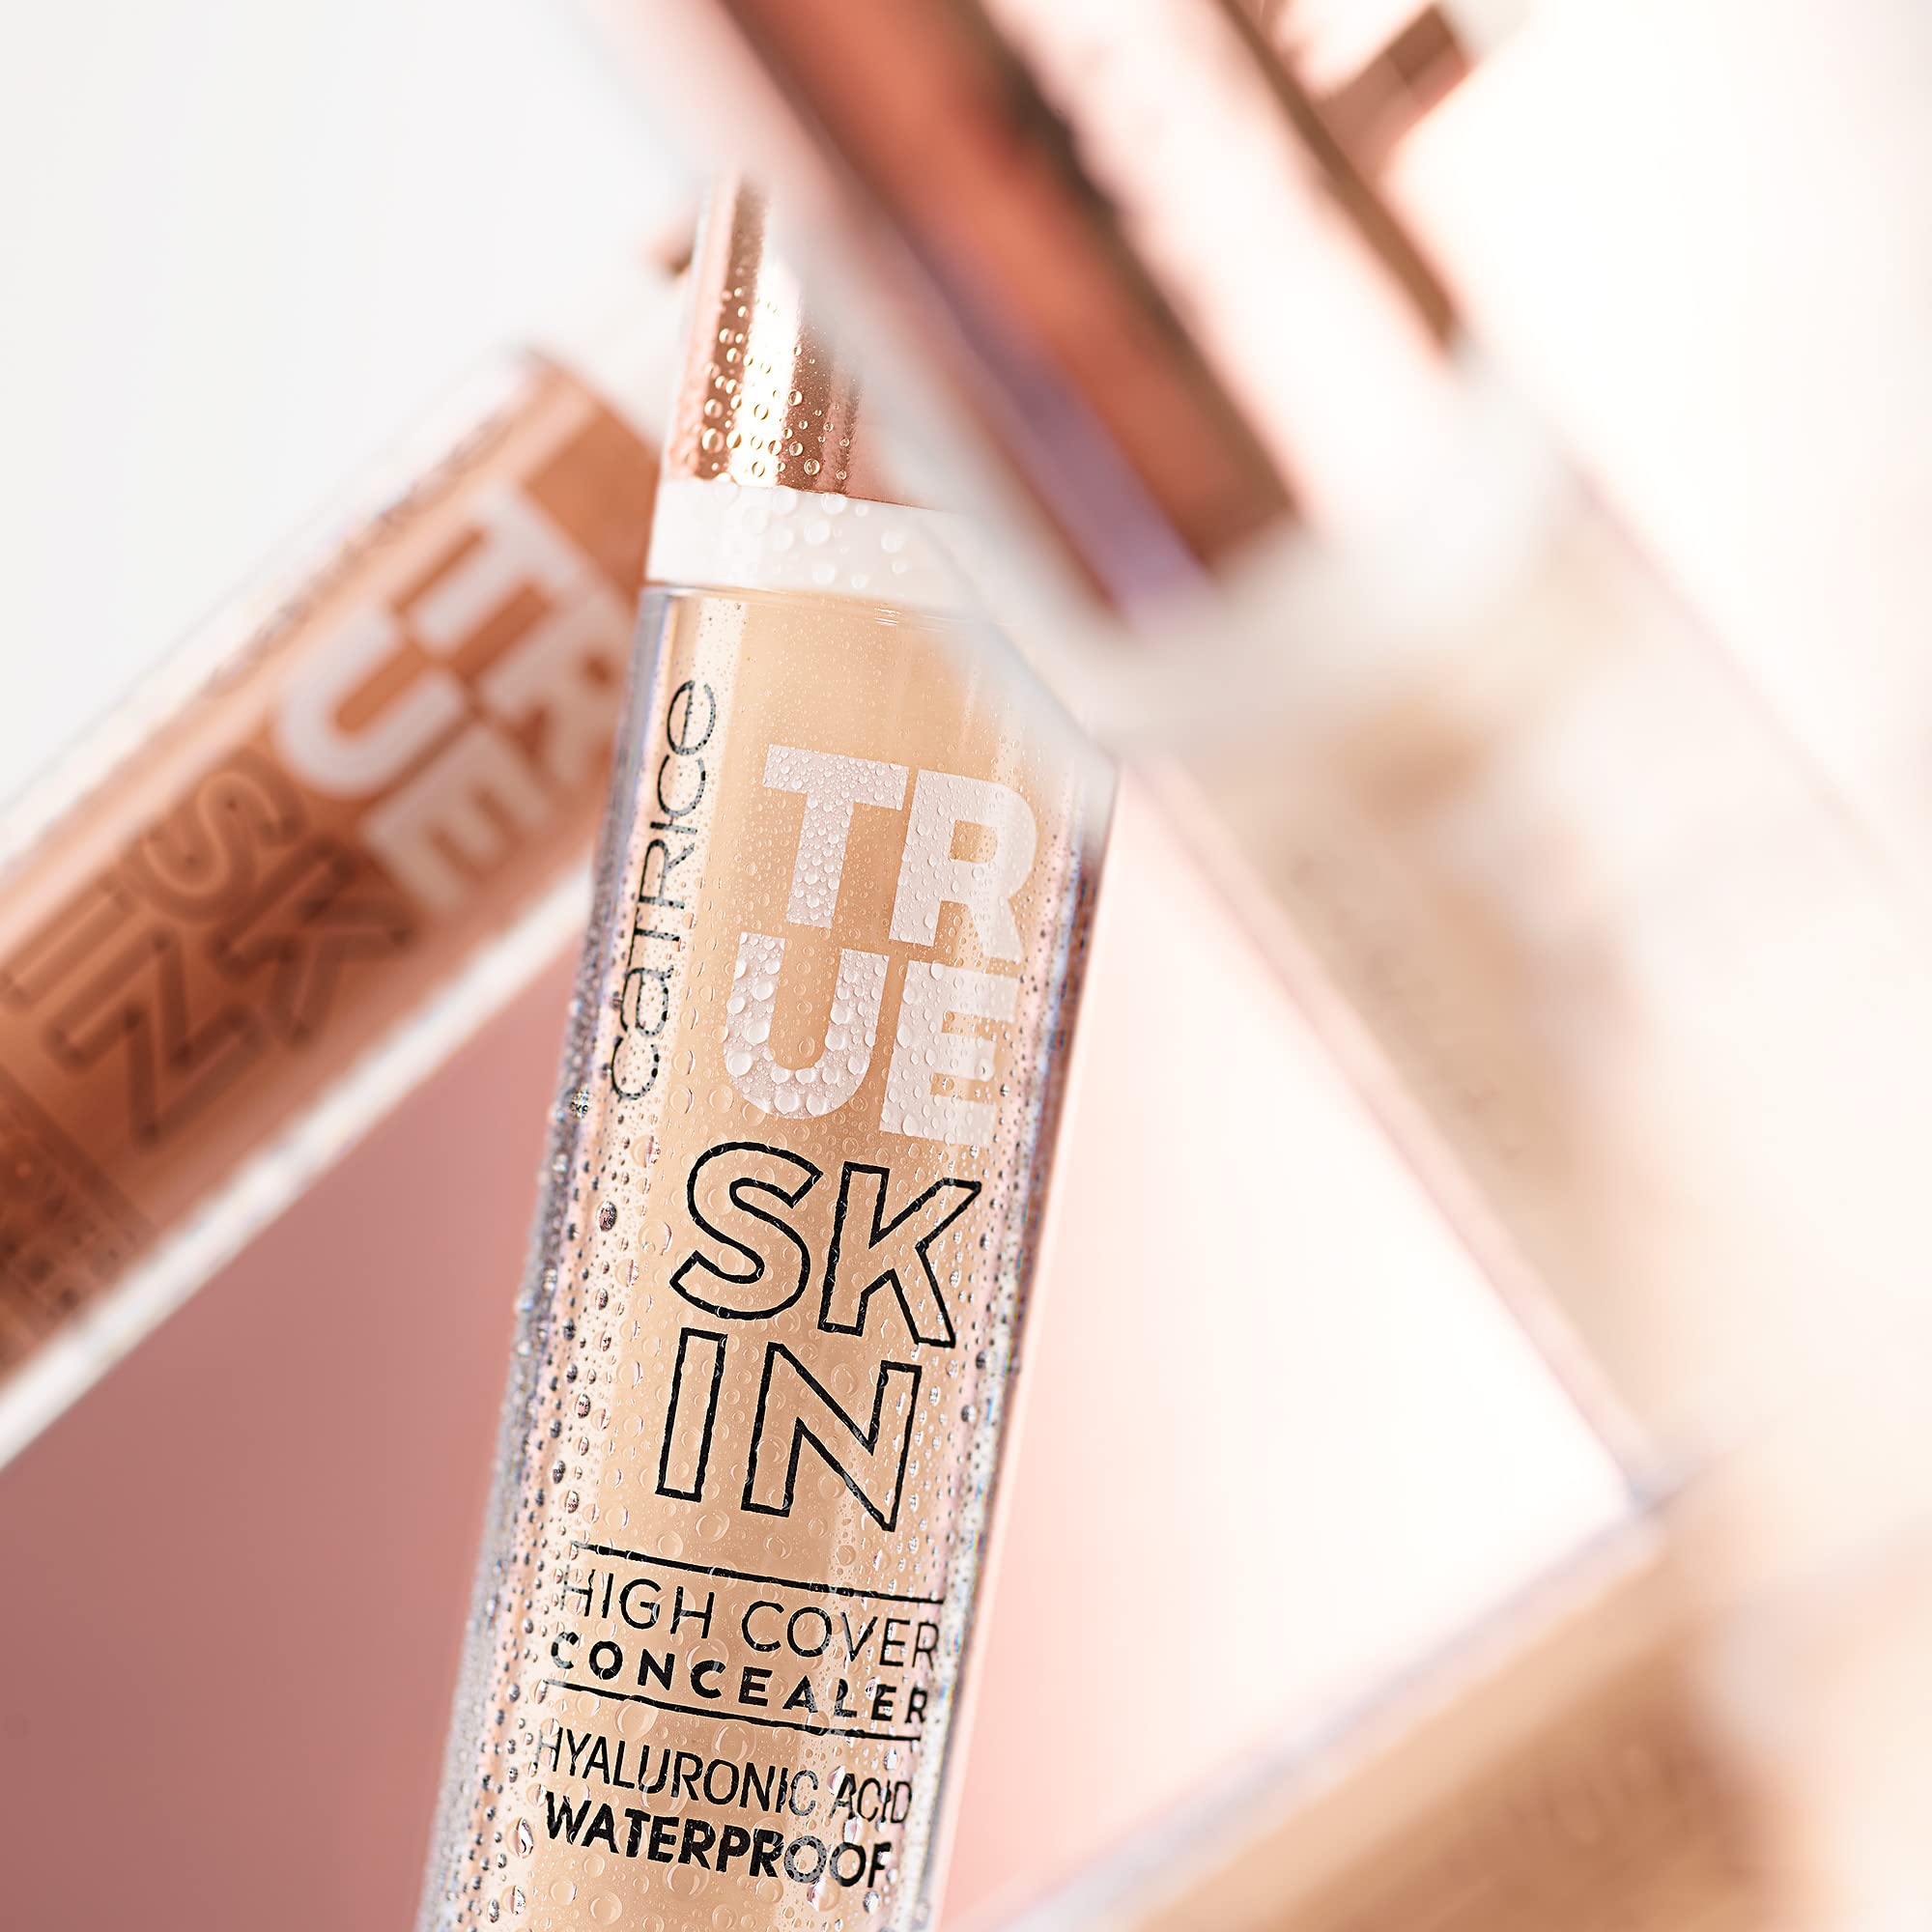 Catrice | True Skin High Cover Concealer | Waterproof & Lightweight for Soft Matte Look | Contains Hyaluronic Acid & Lasts Up to 18 Hours | Vegan, Cruelty Free, Gluten Free (015 | Warm Vanilla)